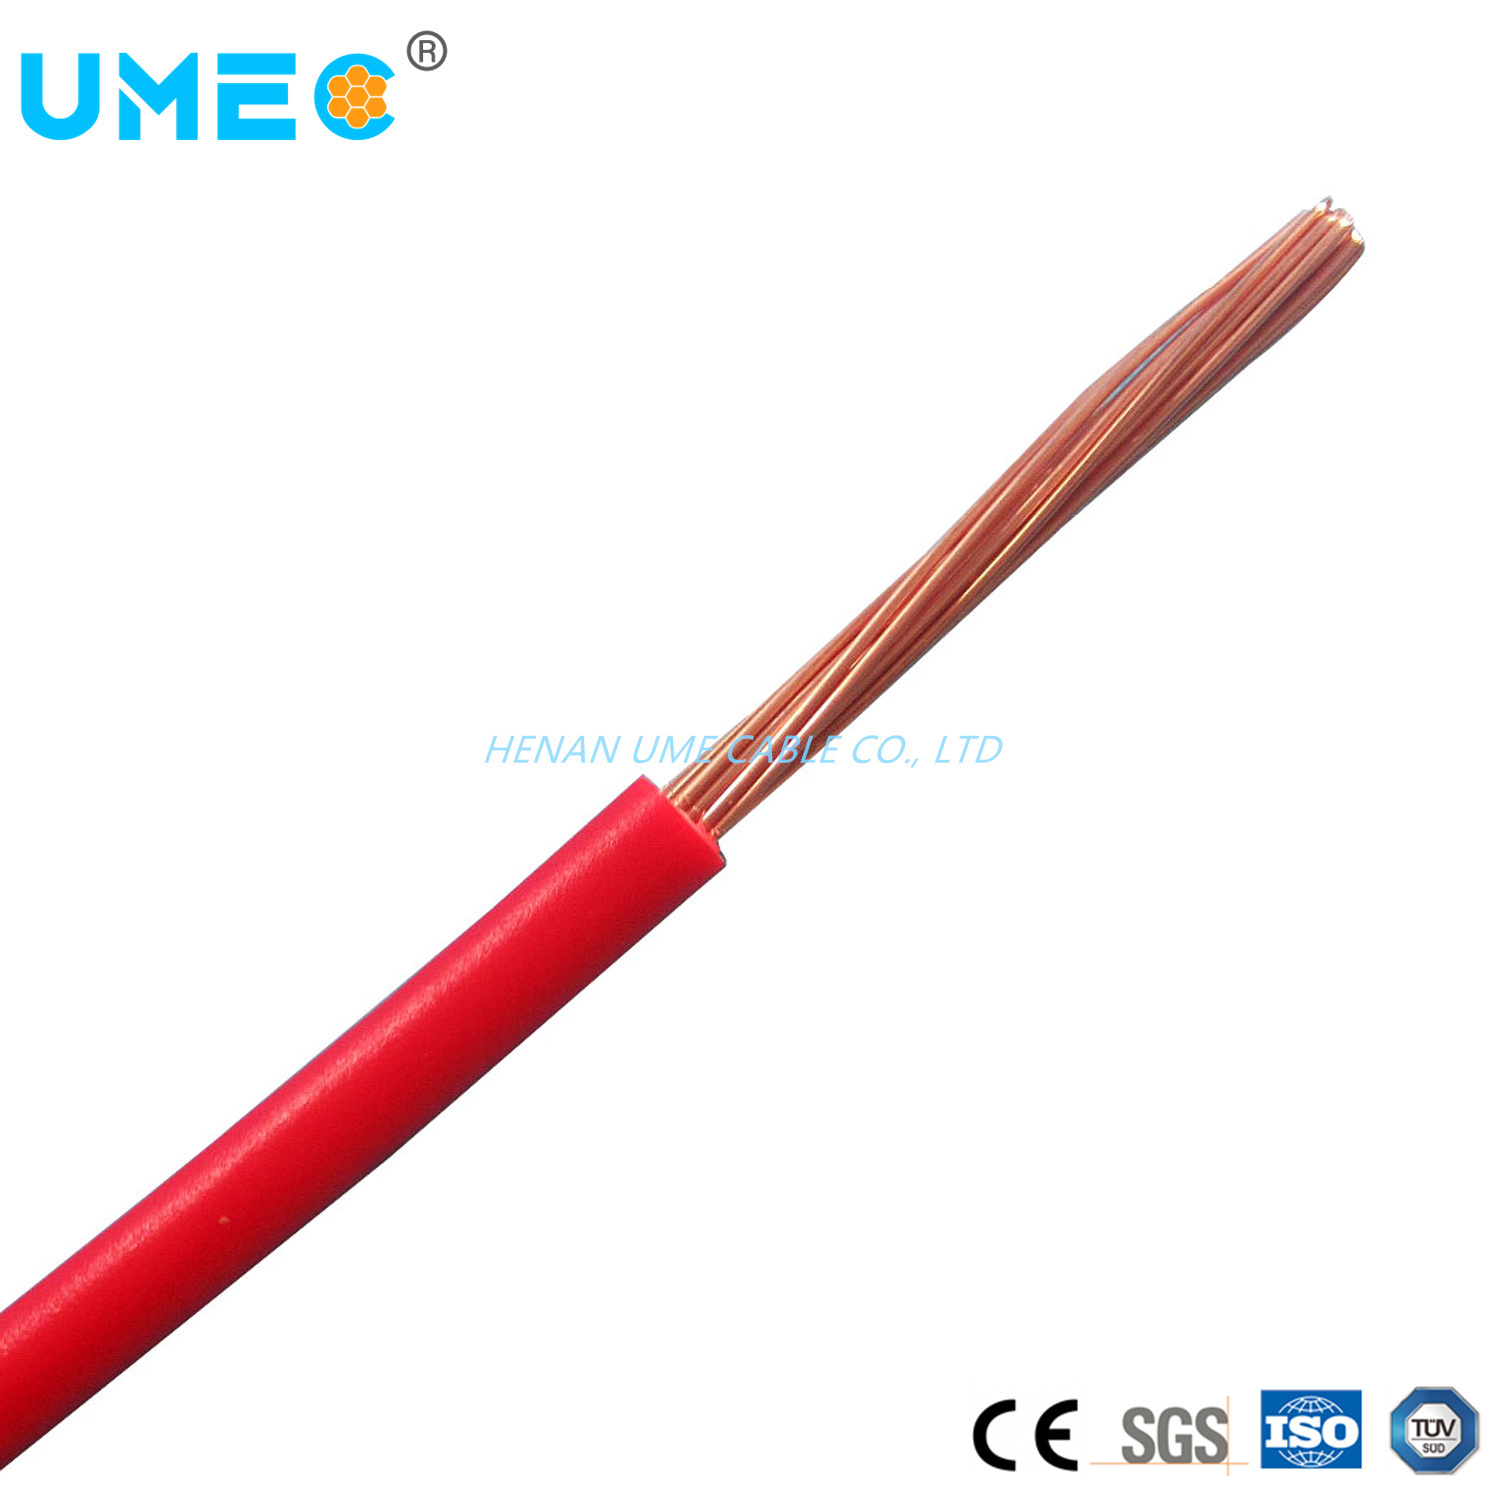 Electric BV/Blv H07V-U Cable with PVC Insulated Copper or Aluminum 4mm² -185mm² Electrical Power Wire